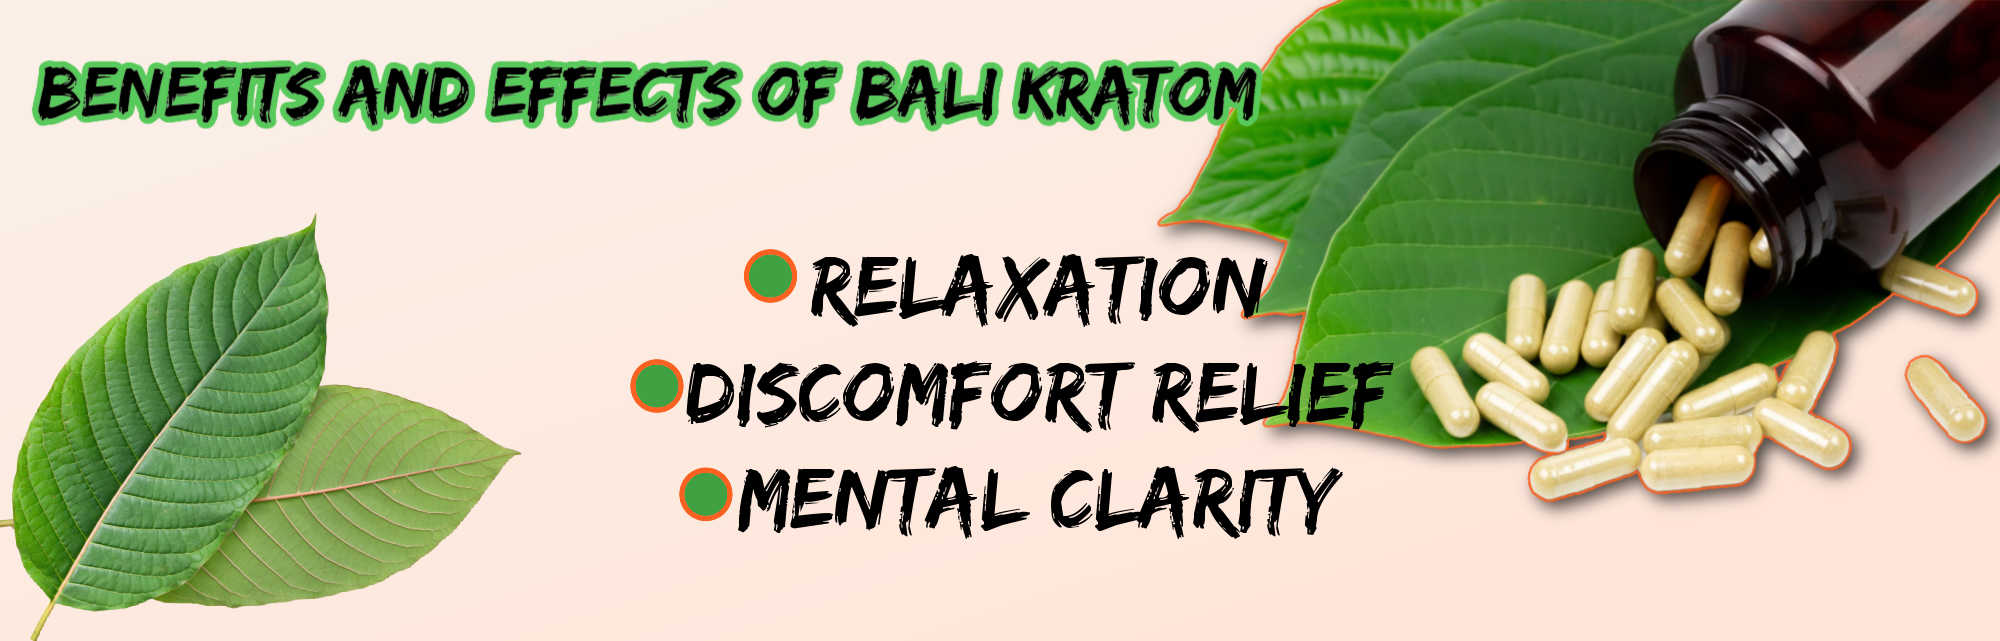 image of bali kratom benefits and effects